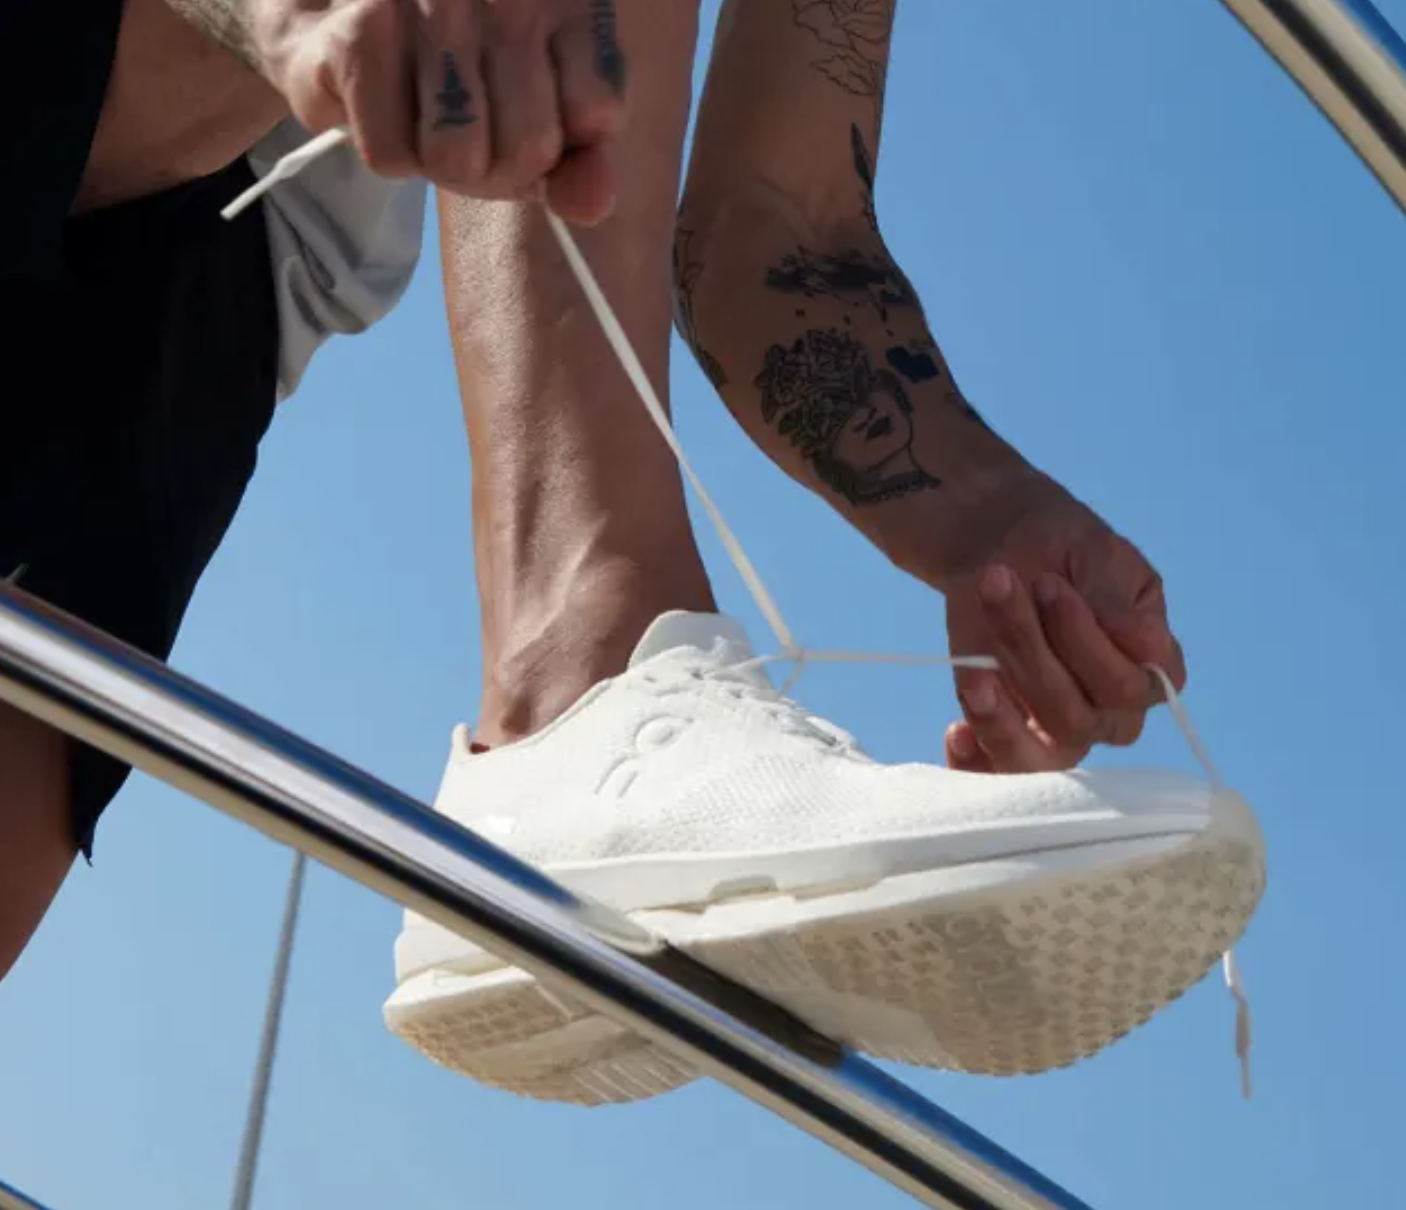 The race to create the first sustainable cult sneaker